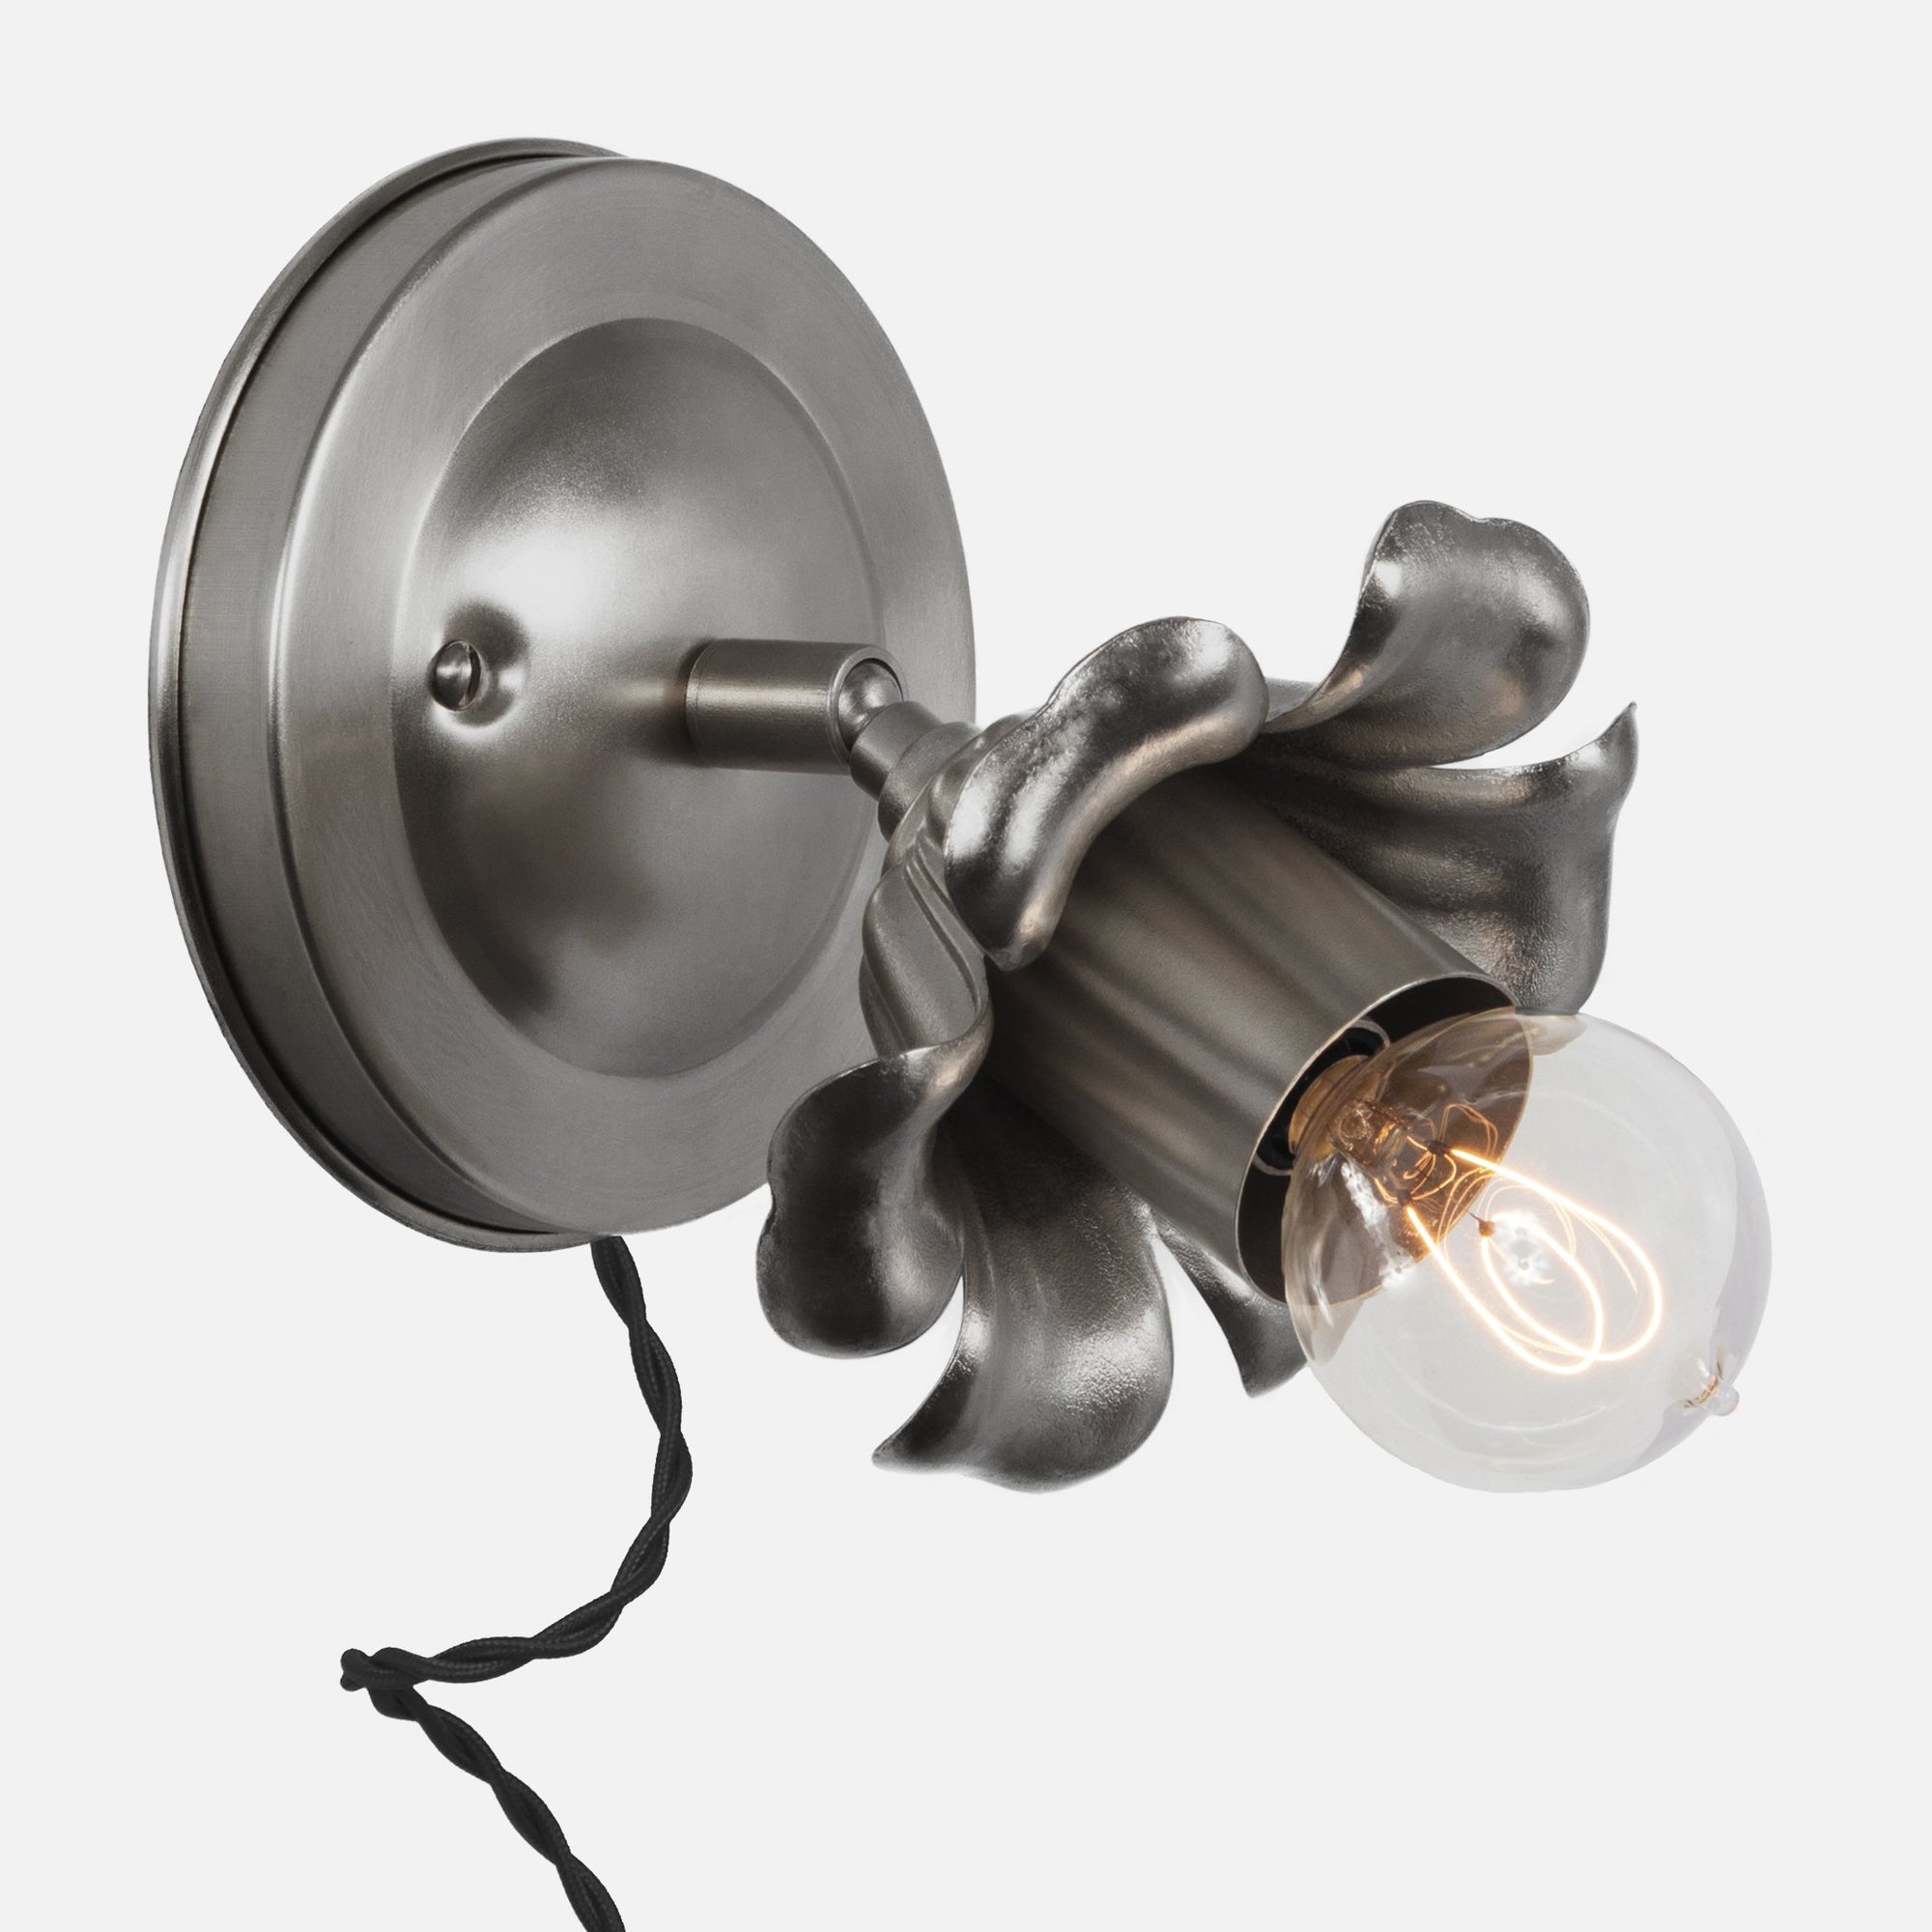 Bloom Wall Sconce - Plug-In